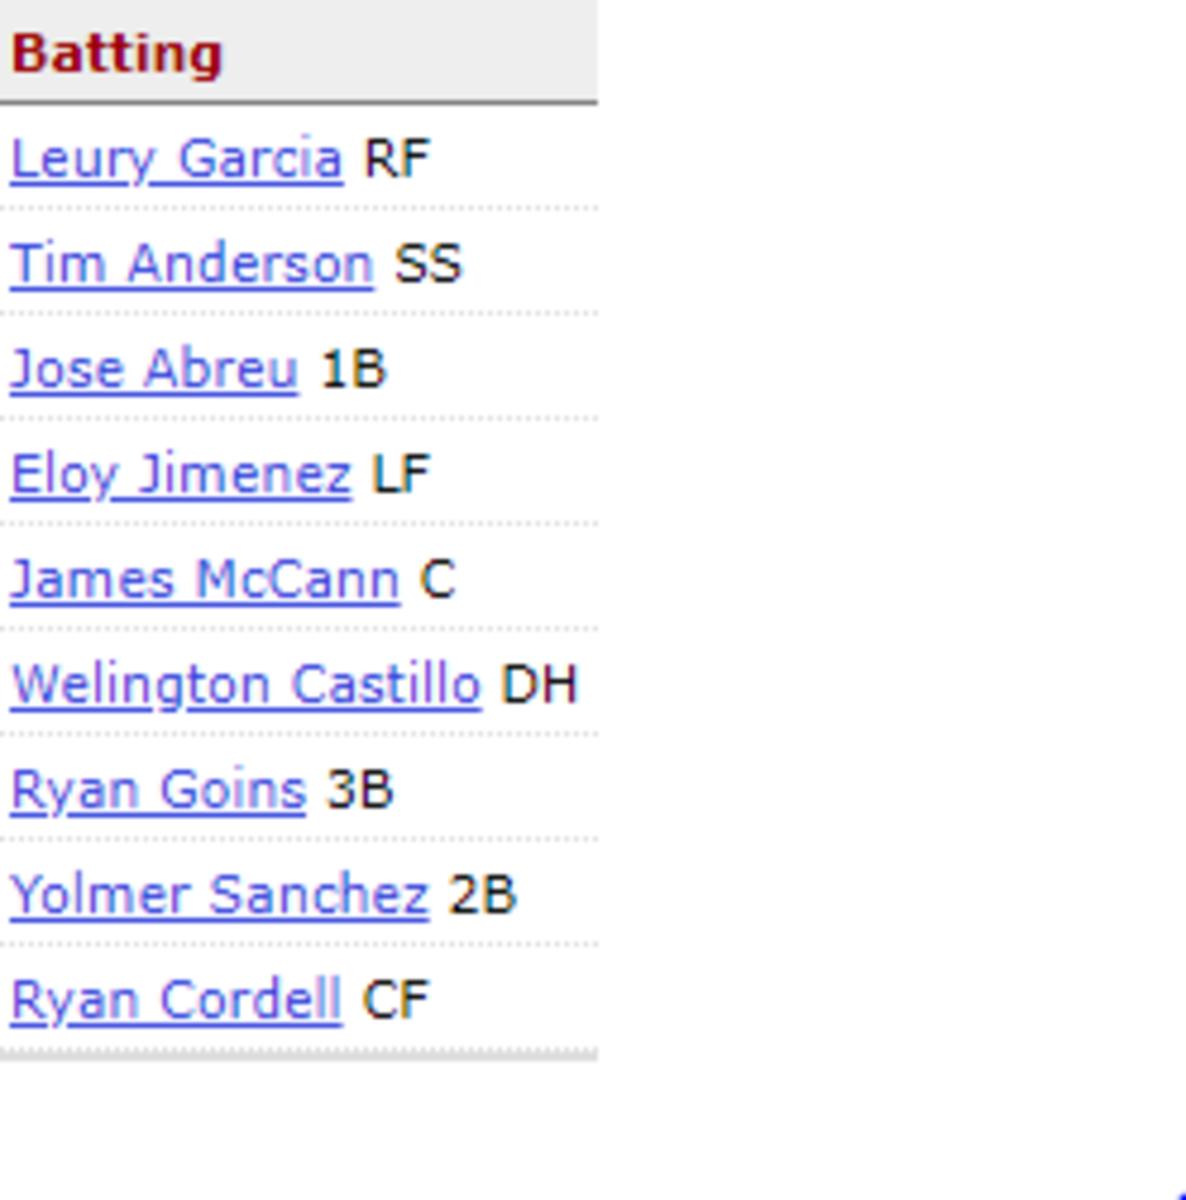 White Sox lineup a year ago today (they won this game 8-1 btw!)